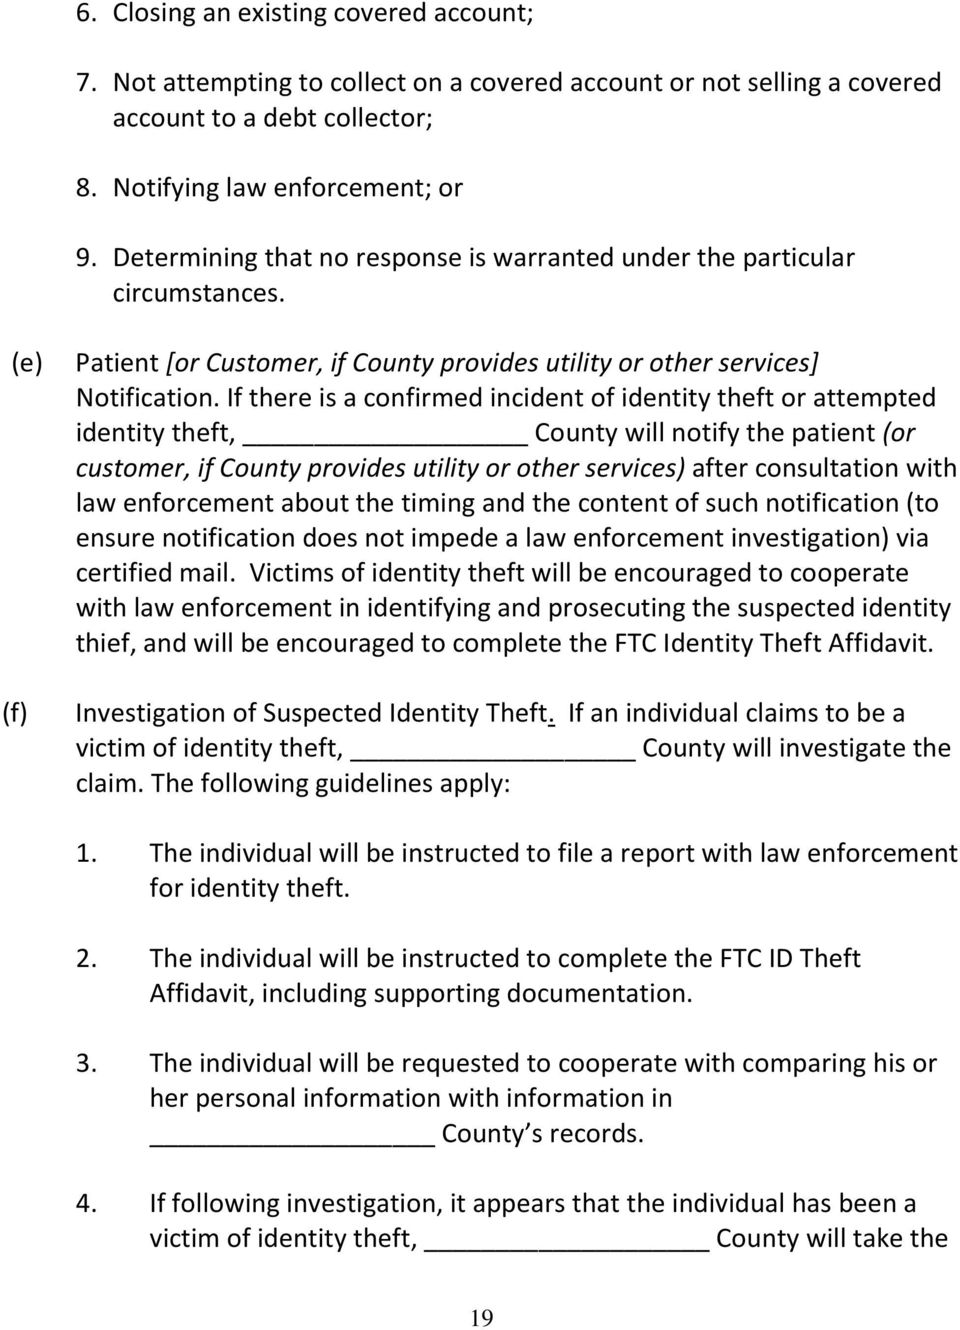 If there is a confirmed incident of identity theft or attempted identity theft, County will notify the patient (or customer, if County provides utility or other services) after consultation with law